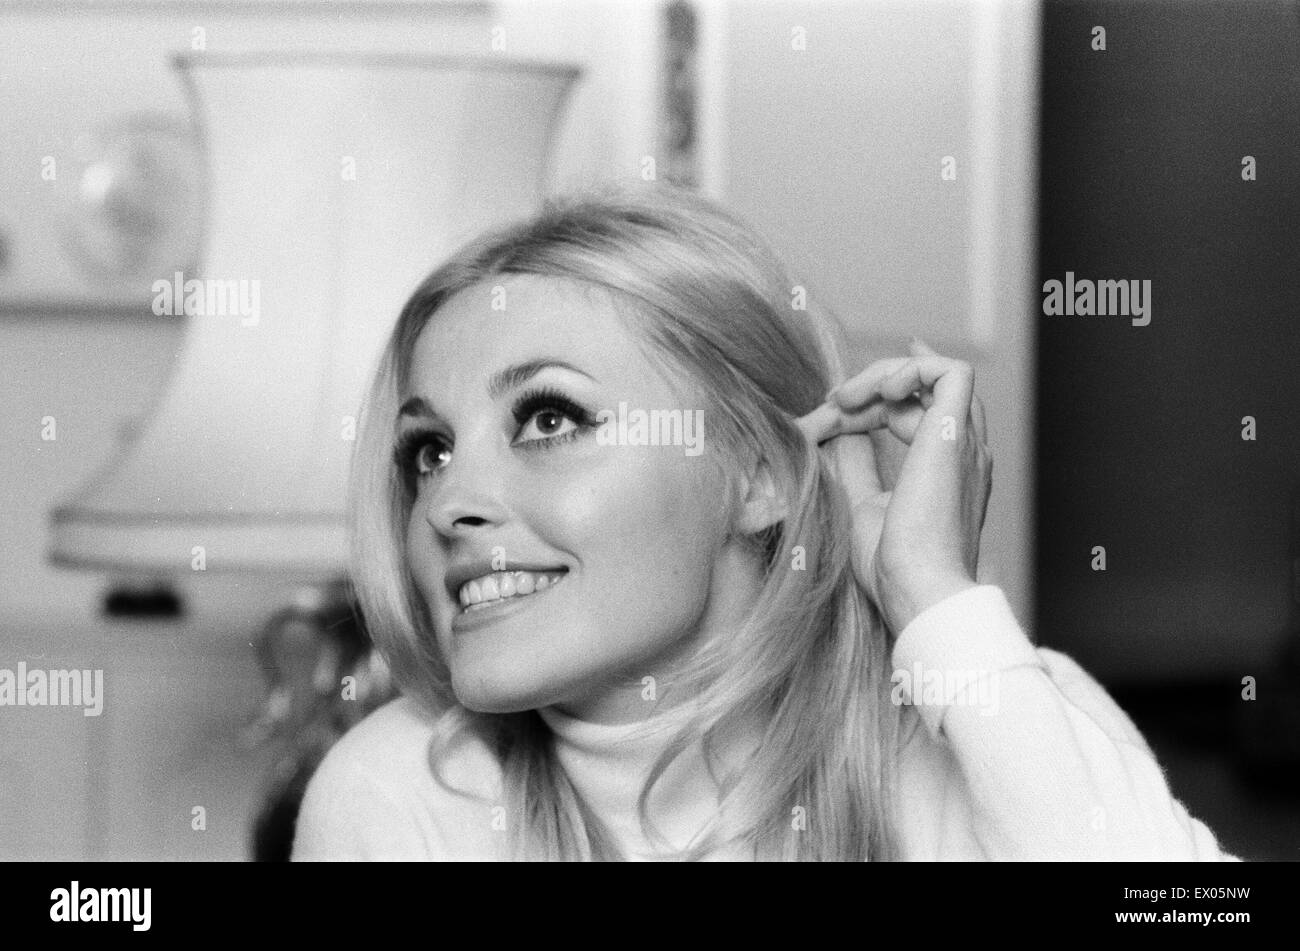 Sharon Tate, Actress and Model, aged 22 years old, pictured at her apartment in Belgravia, London, Friday 15th October 1965. Stock Photo